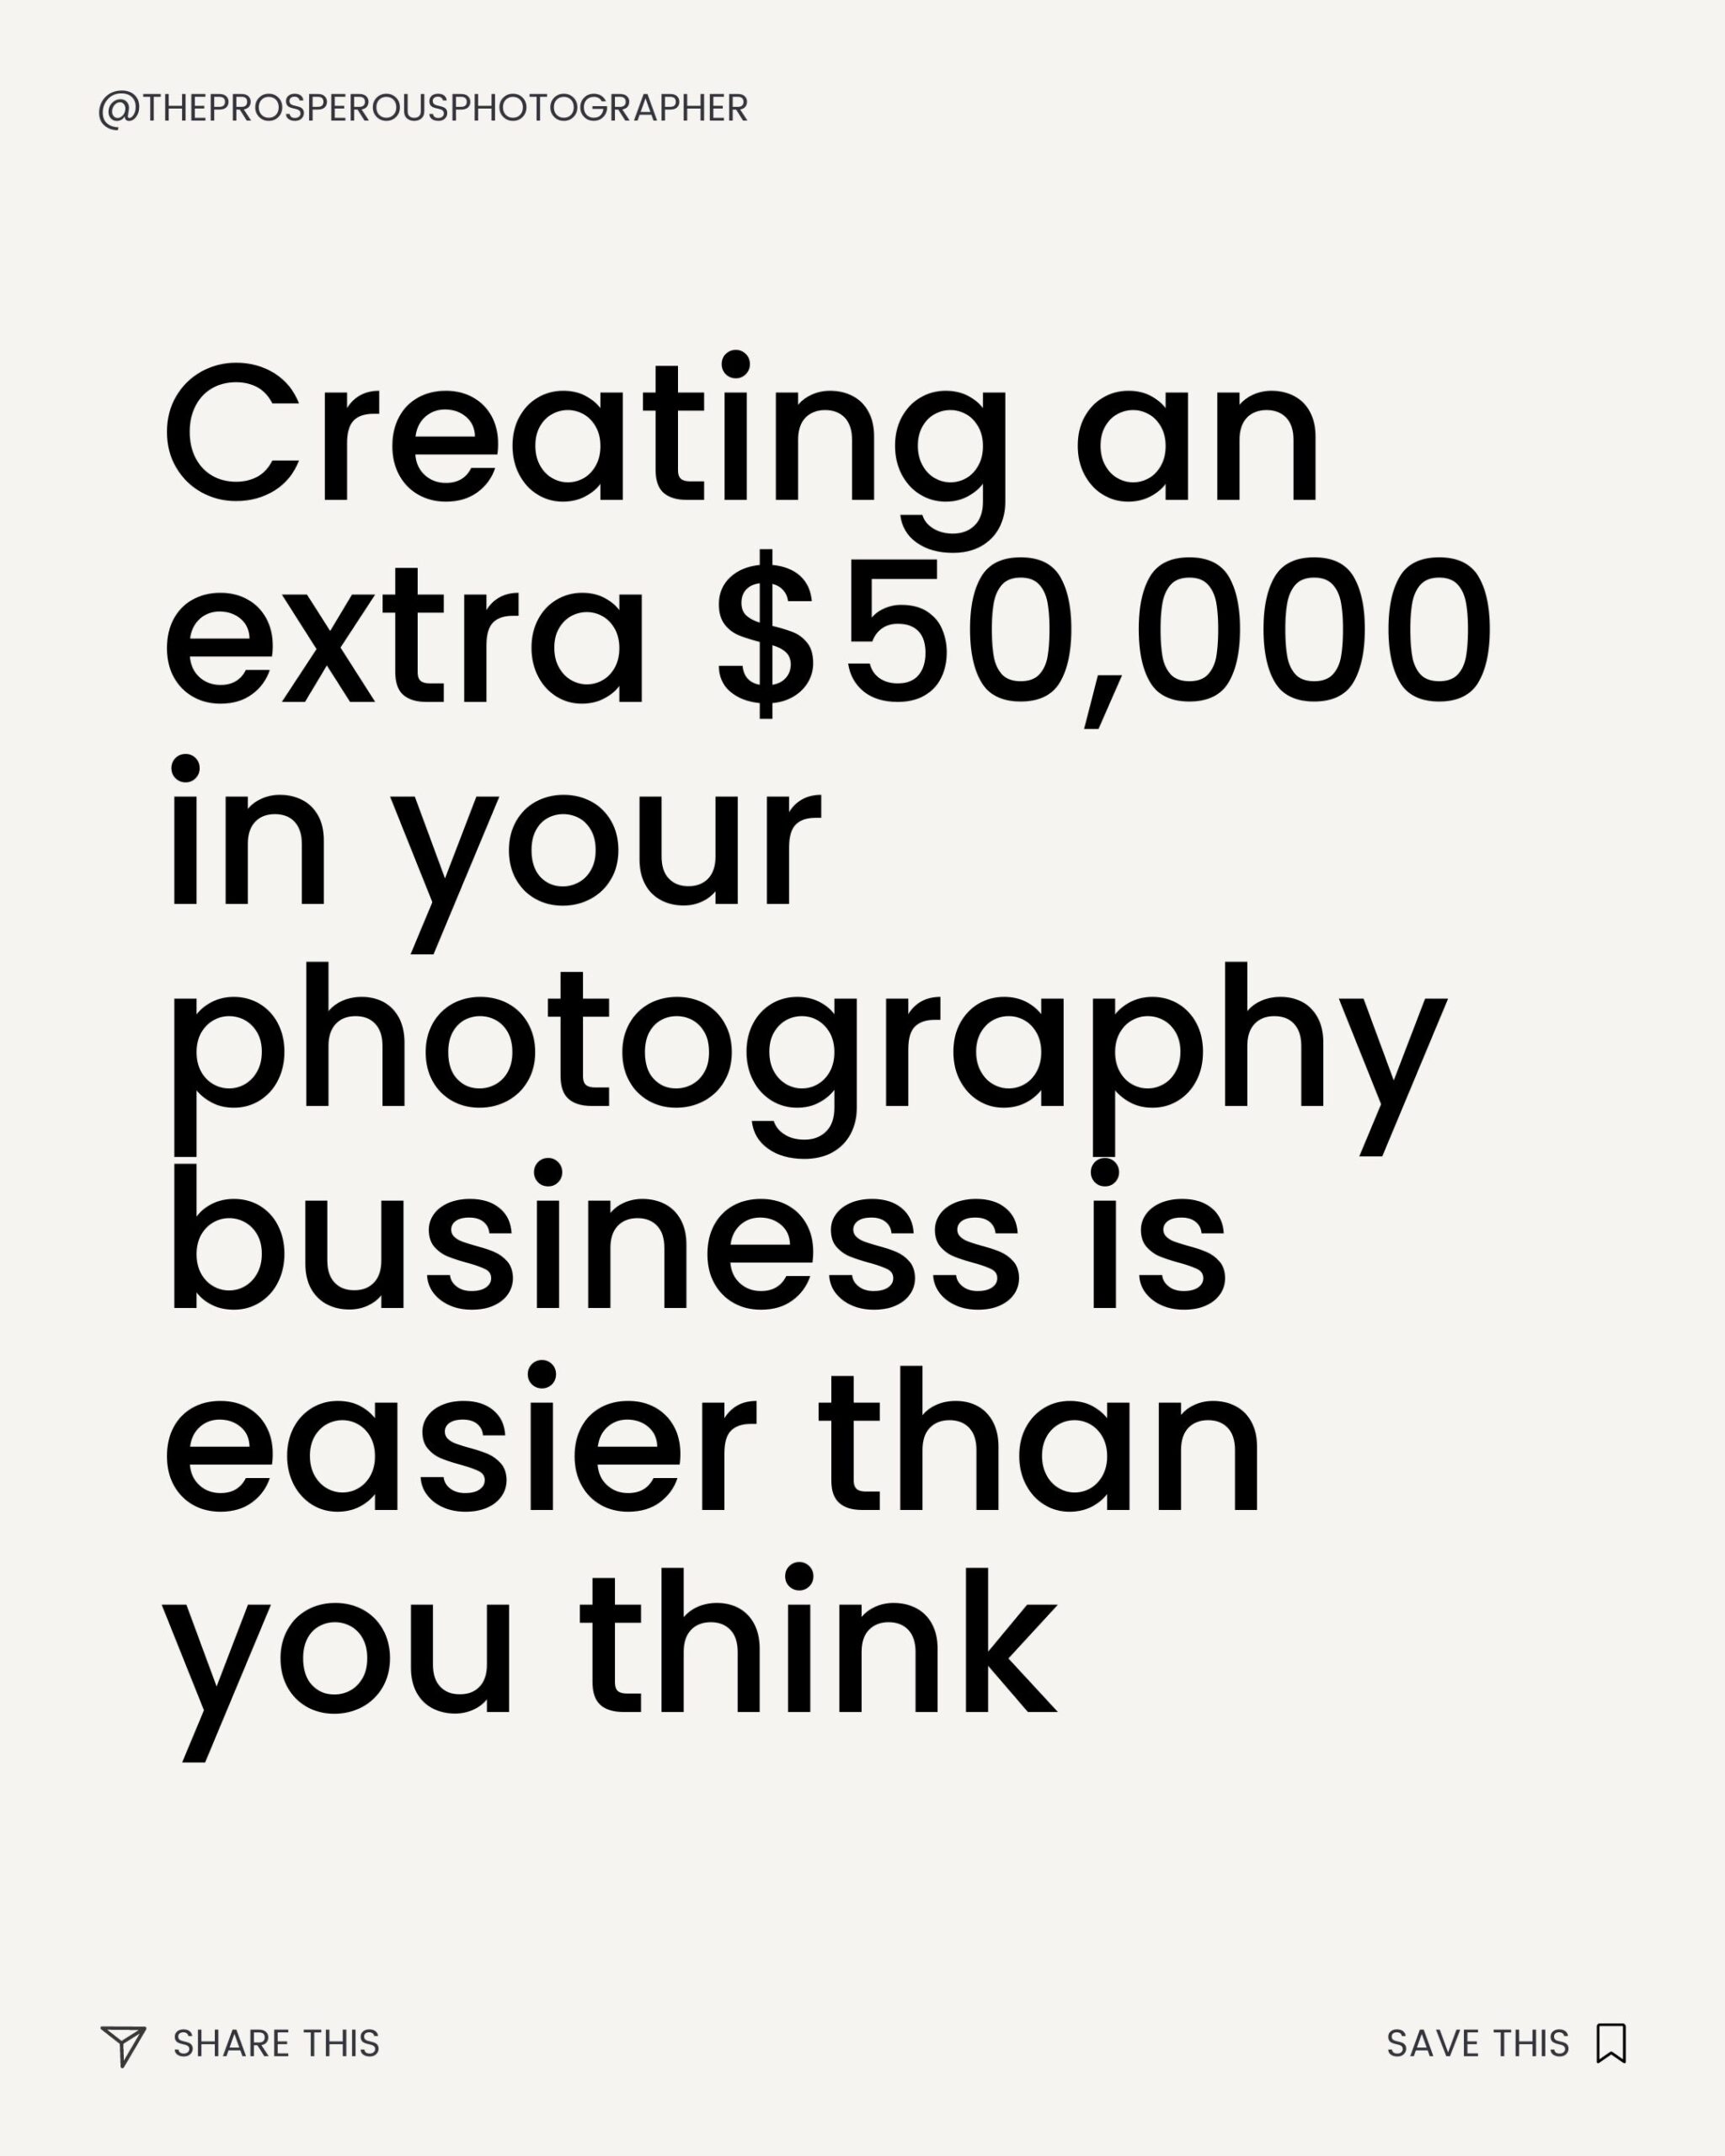 how to add $50,000 to your photography business